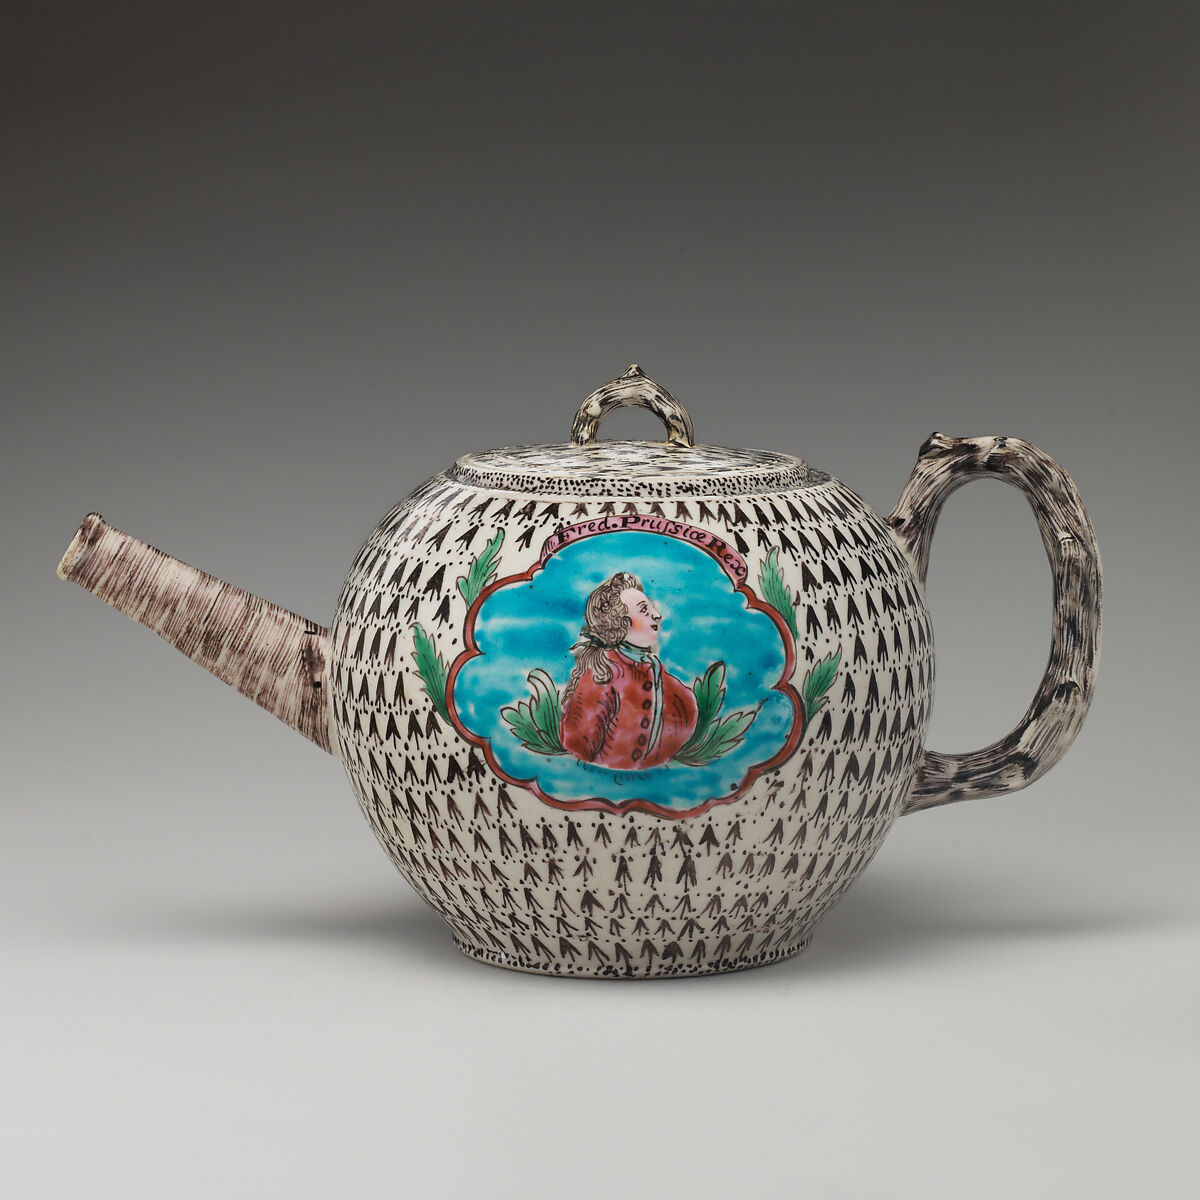 Teapot with portrait of Frederick the Great of Prussia (1712–1786), Salt-glazed stoneware with enamel decoration, British, Staffordshire 